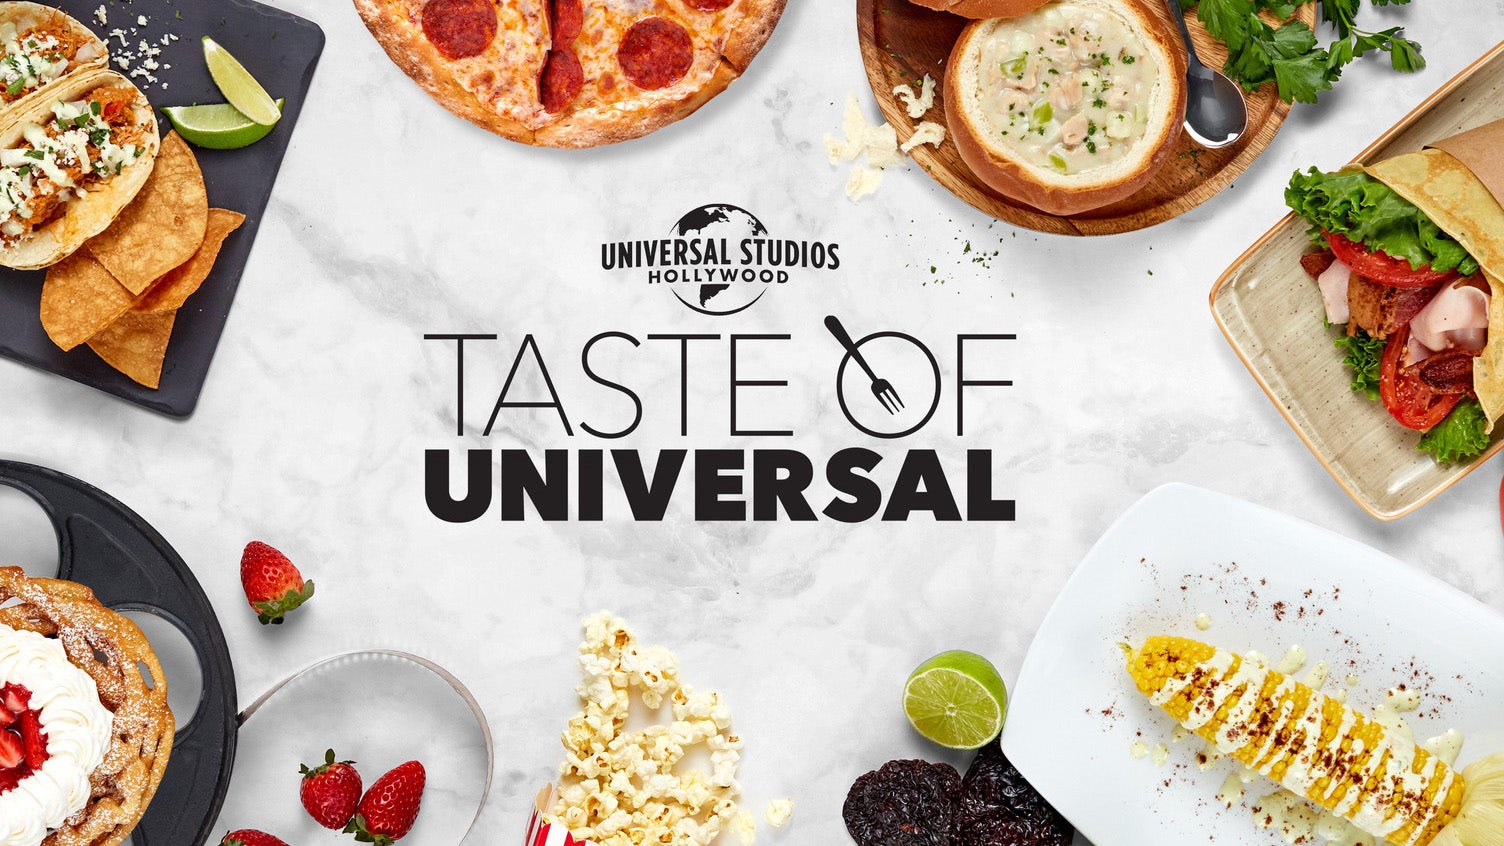 Universal Hollywood reopens with food, shopping event after Disney announces similar experience